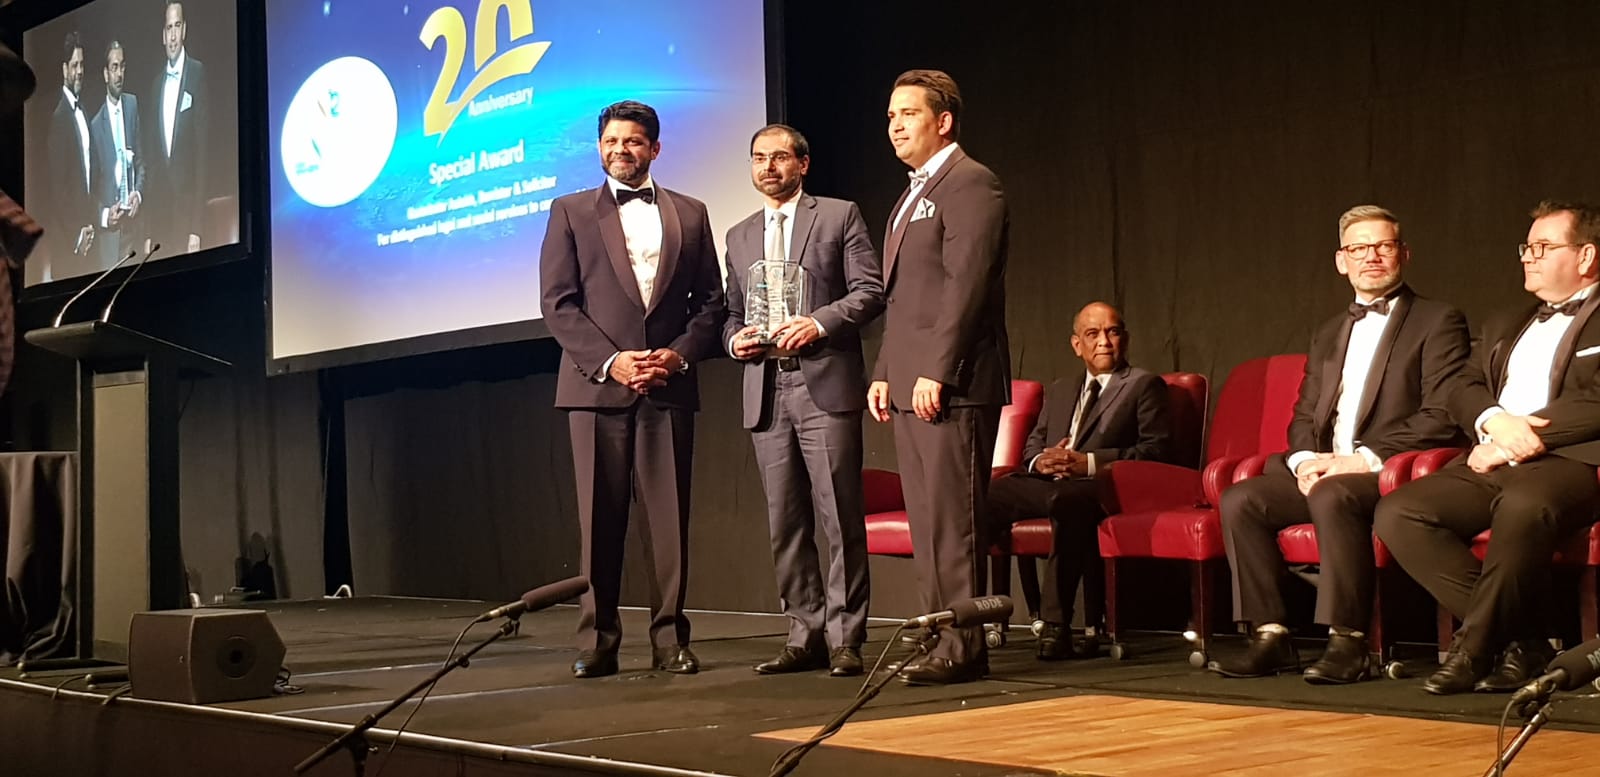 Fiji's Attorney-General Aiyaz Sayed-Khaiyum, Mr Aulakh, and Opposition leader Simon Bridges at the award ceremony.